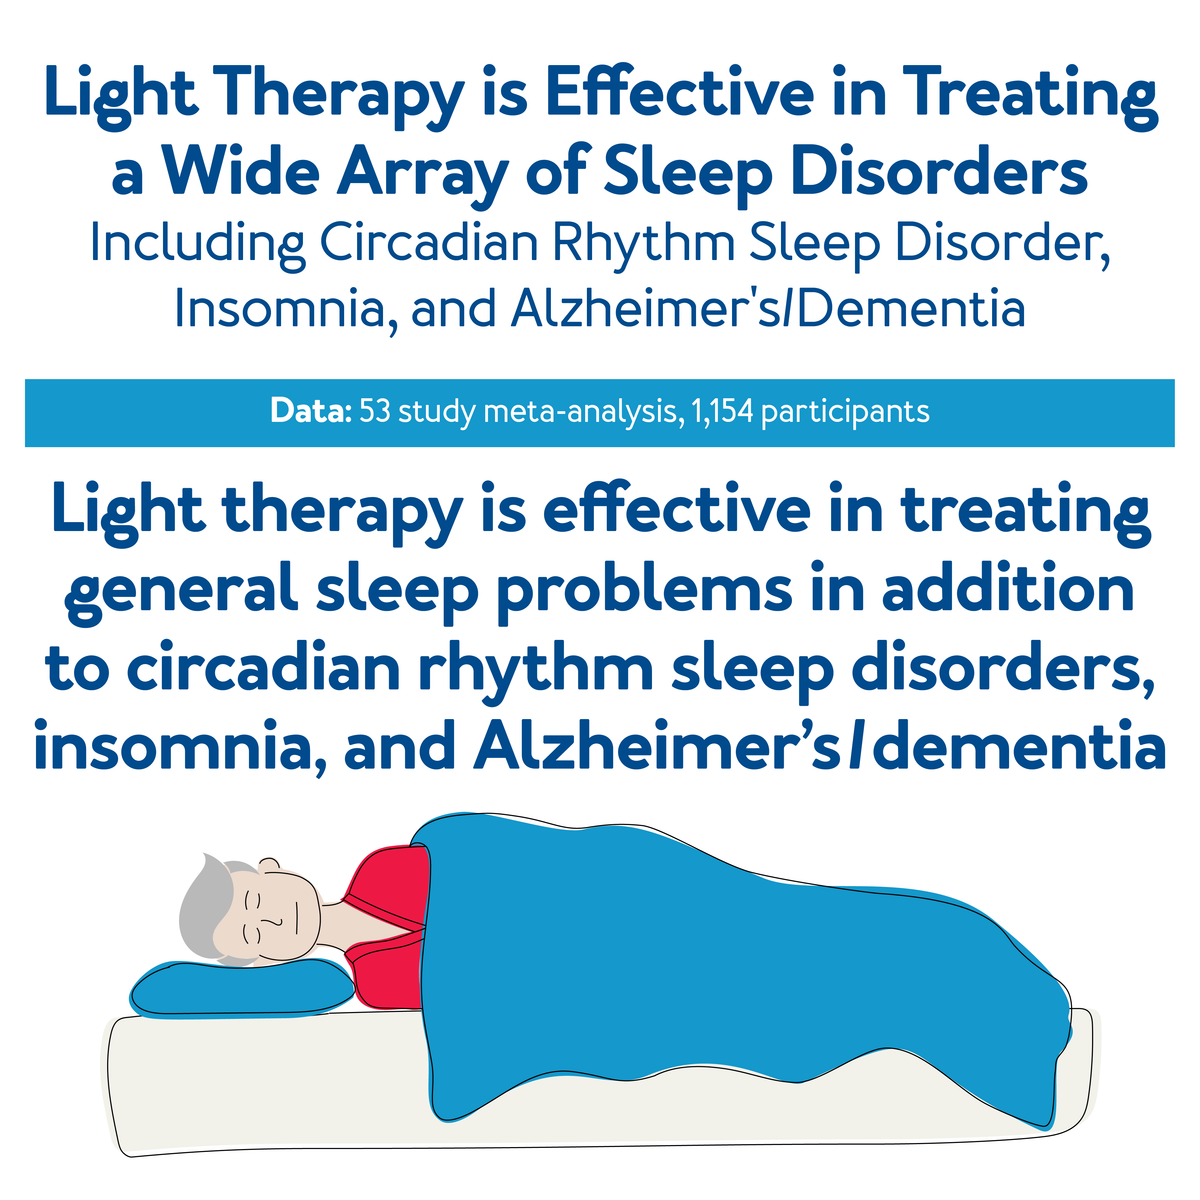 Light Therapy is Effective in Treating a Wide Array of Sleep Disorders, further details are provided below.